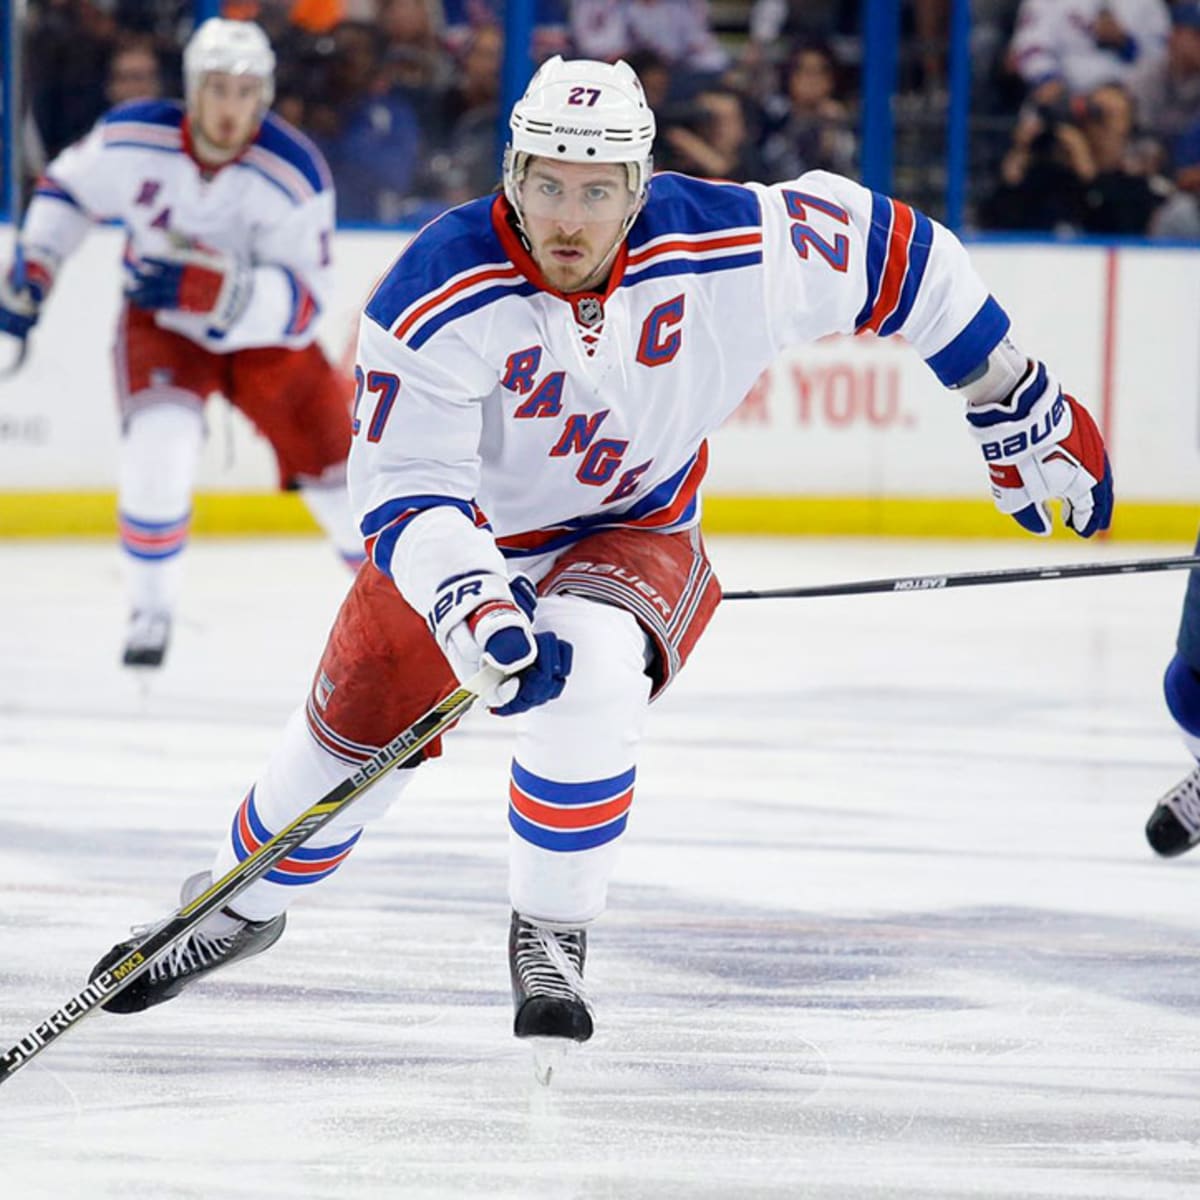 Oilers nearly acquired McDonagh at 2016 NHL Draft